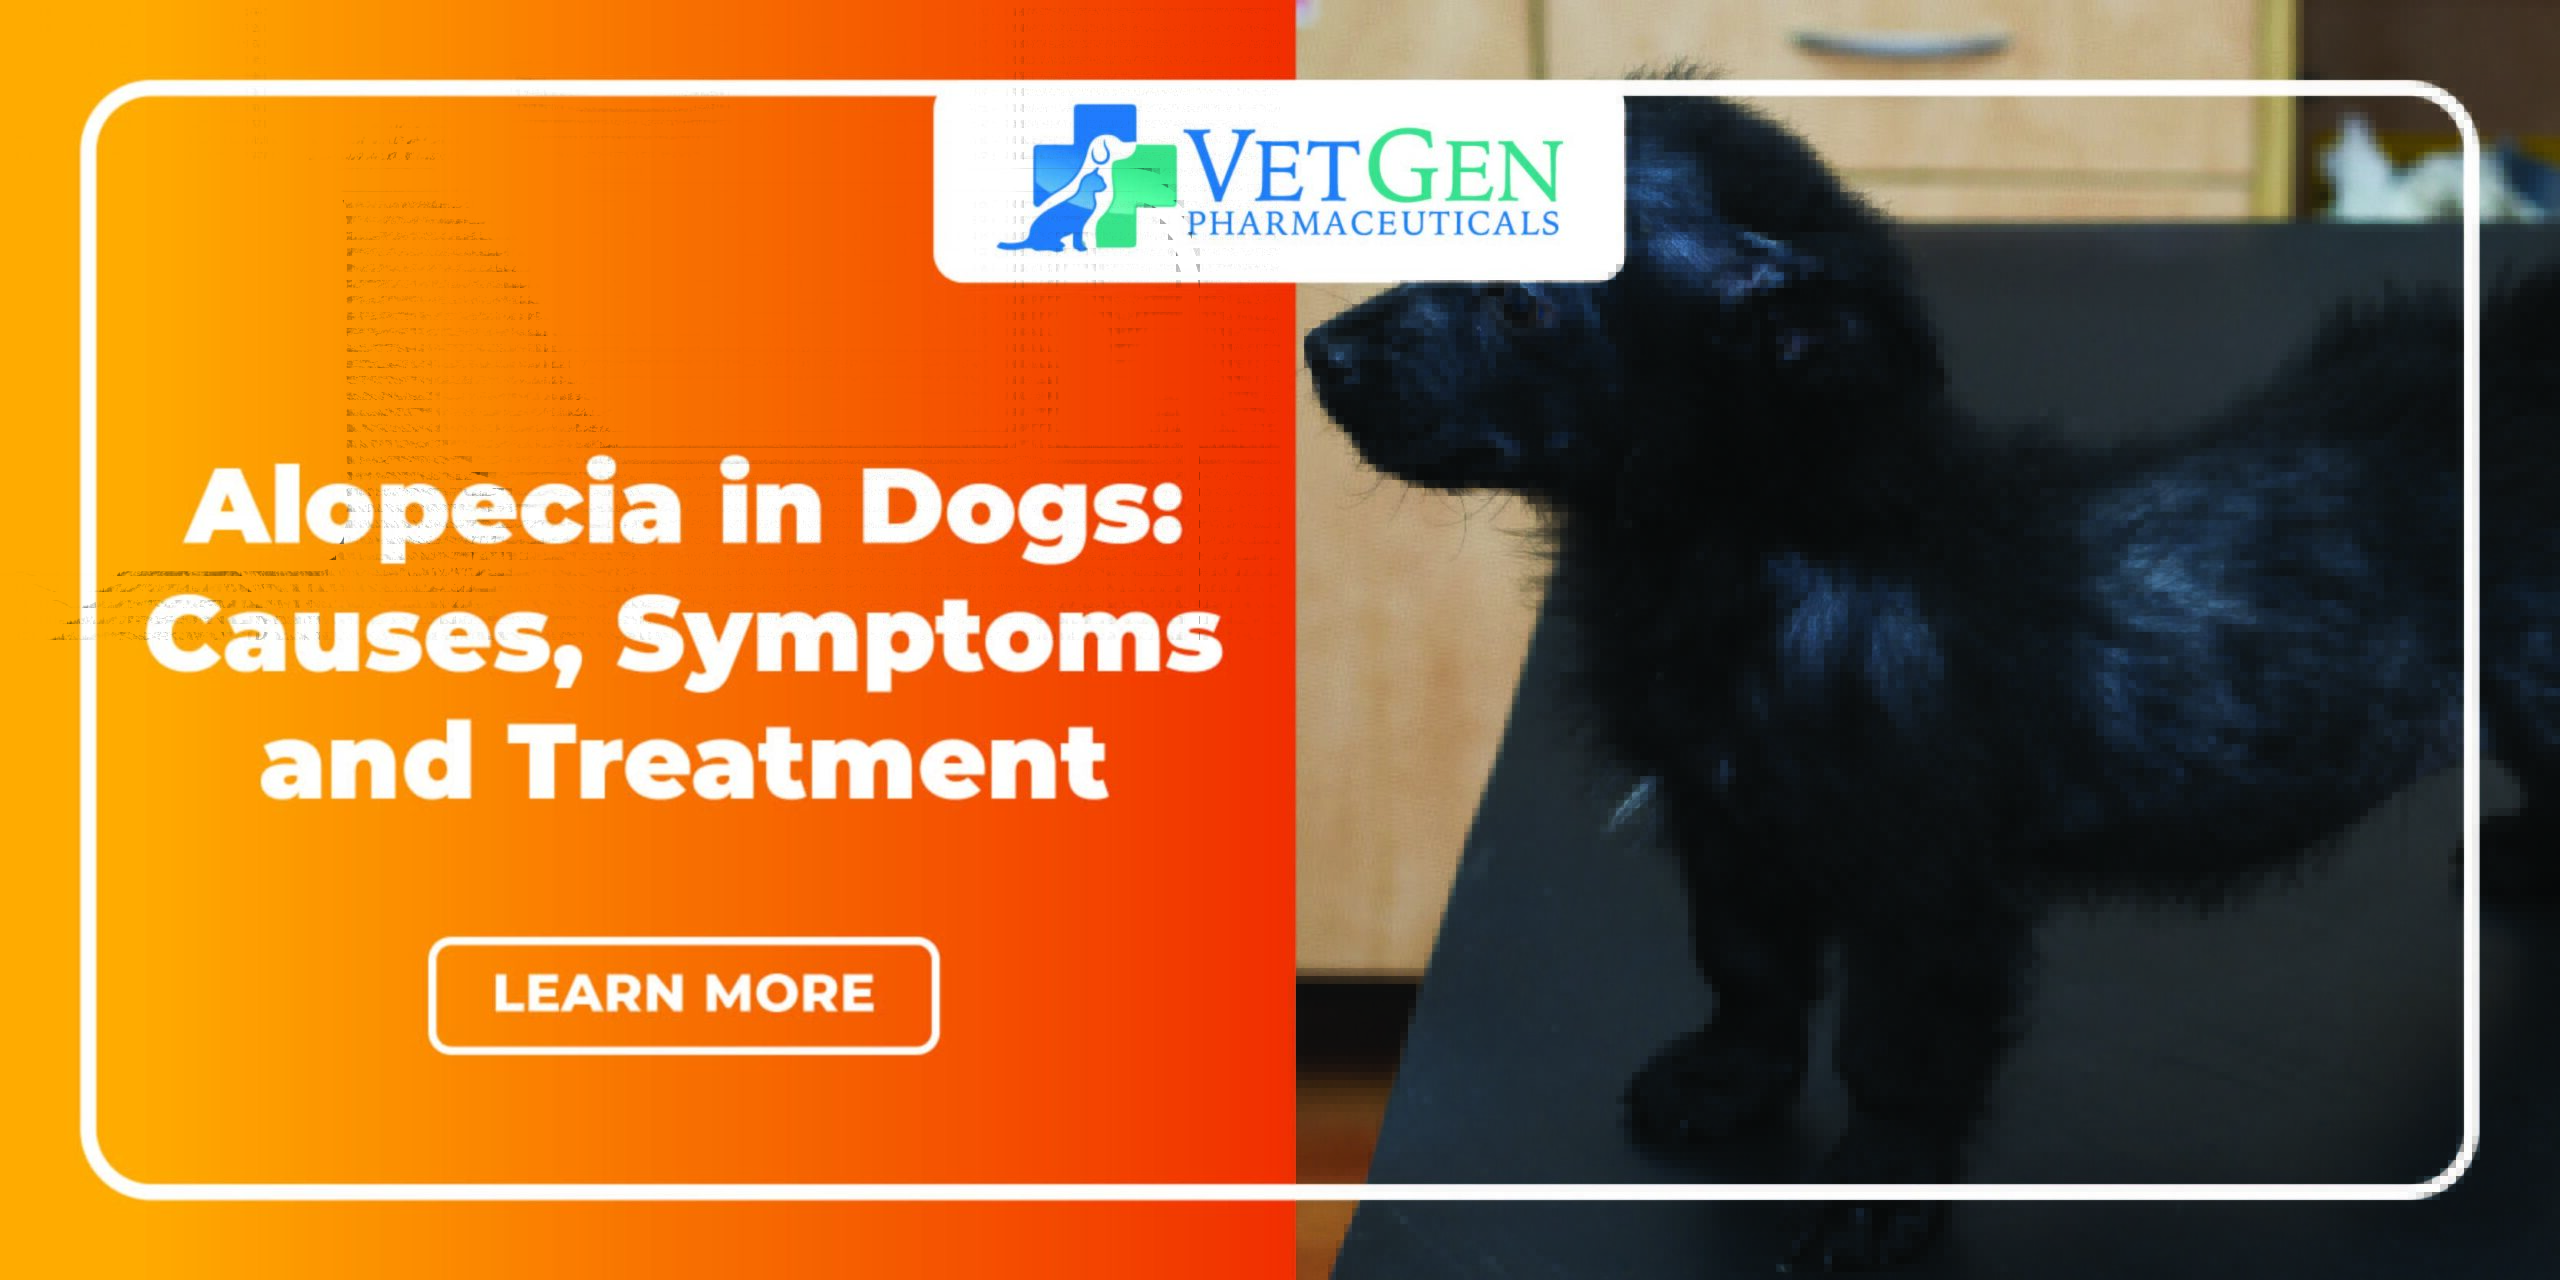 Alopecia in Dogs - Causes, Symptoms and Treatment